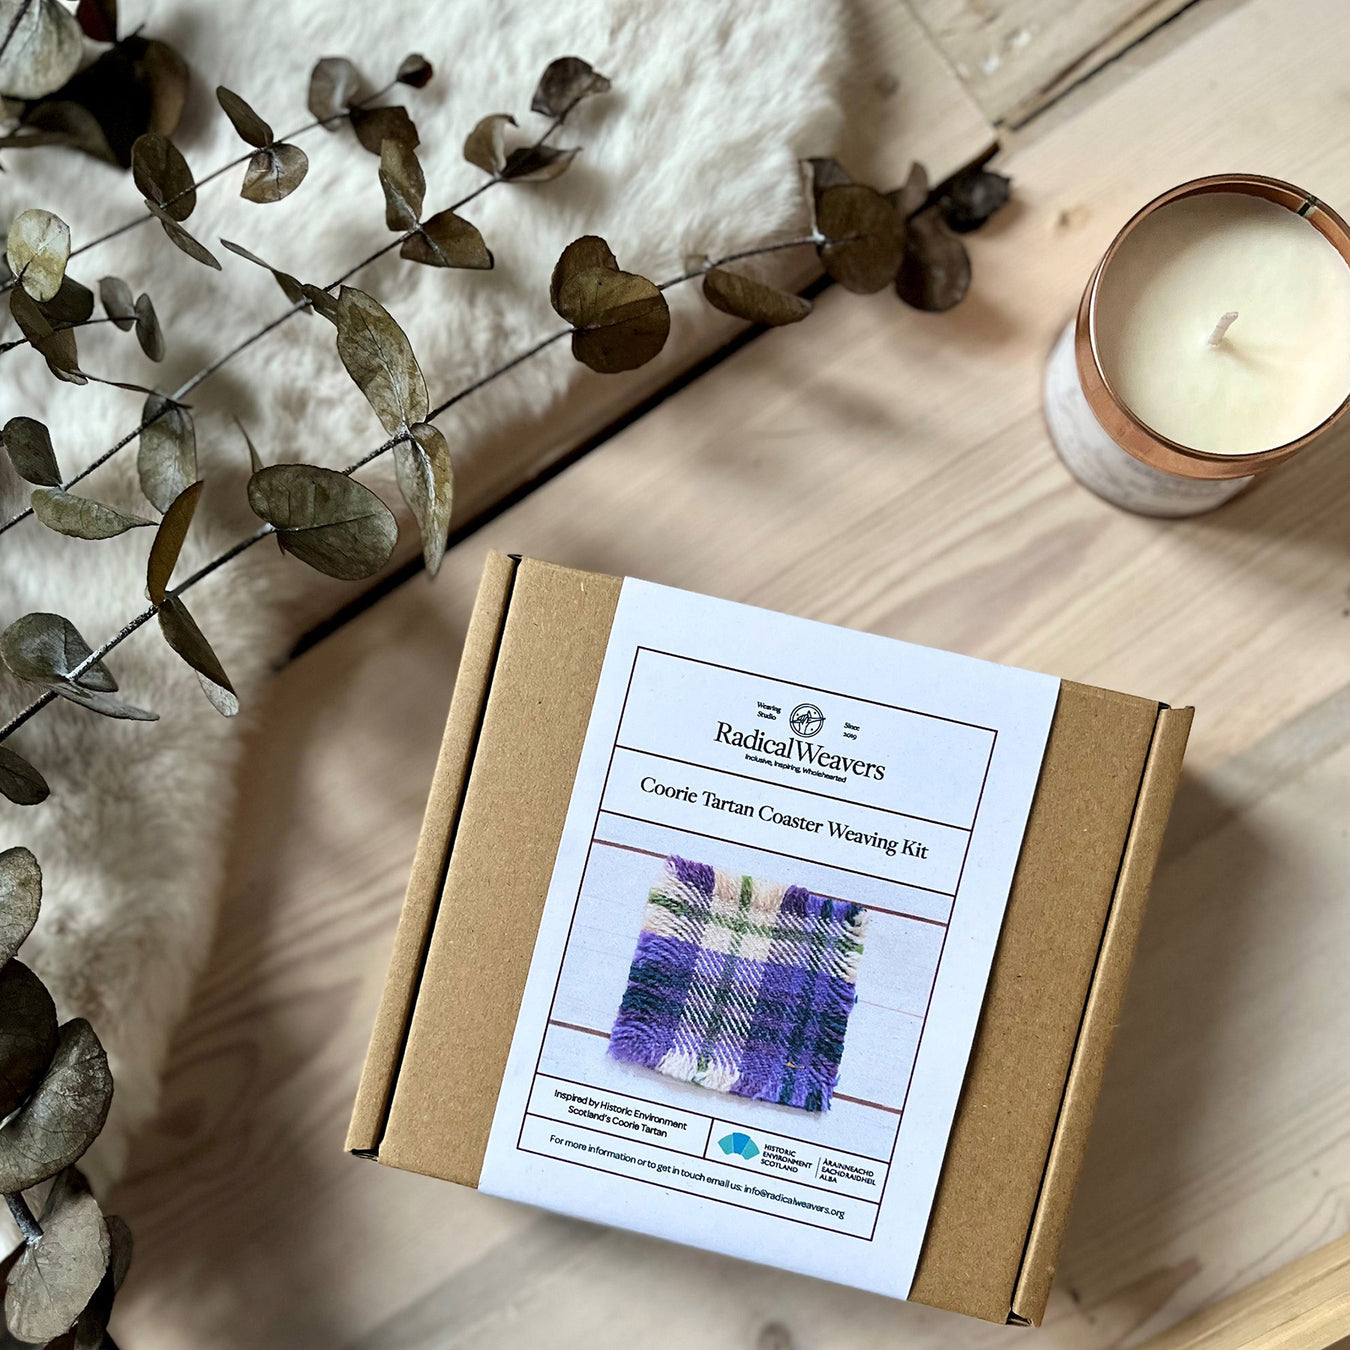 coorie tartan coaster weavign kit box on wooden floor next to a candle and rug with some foliage